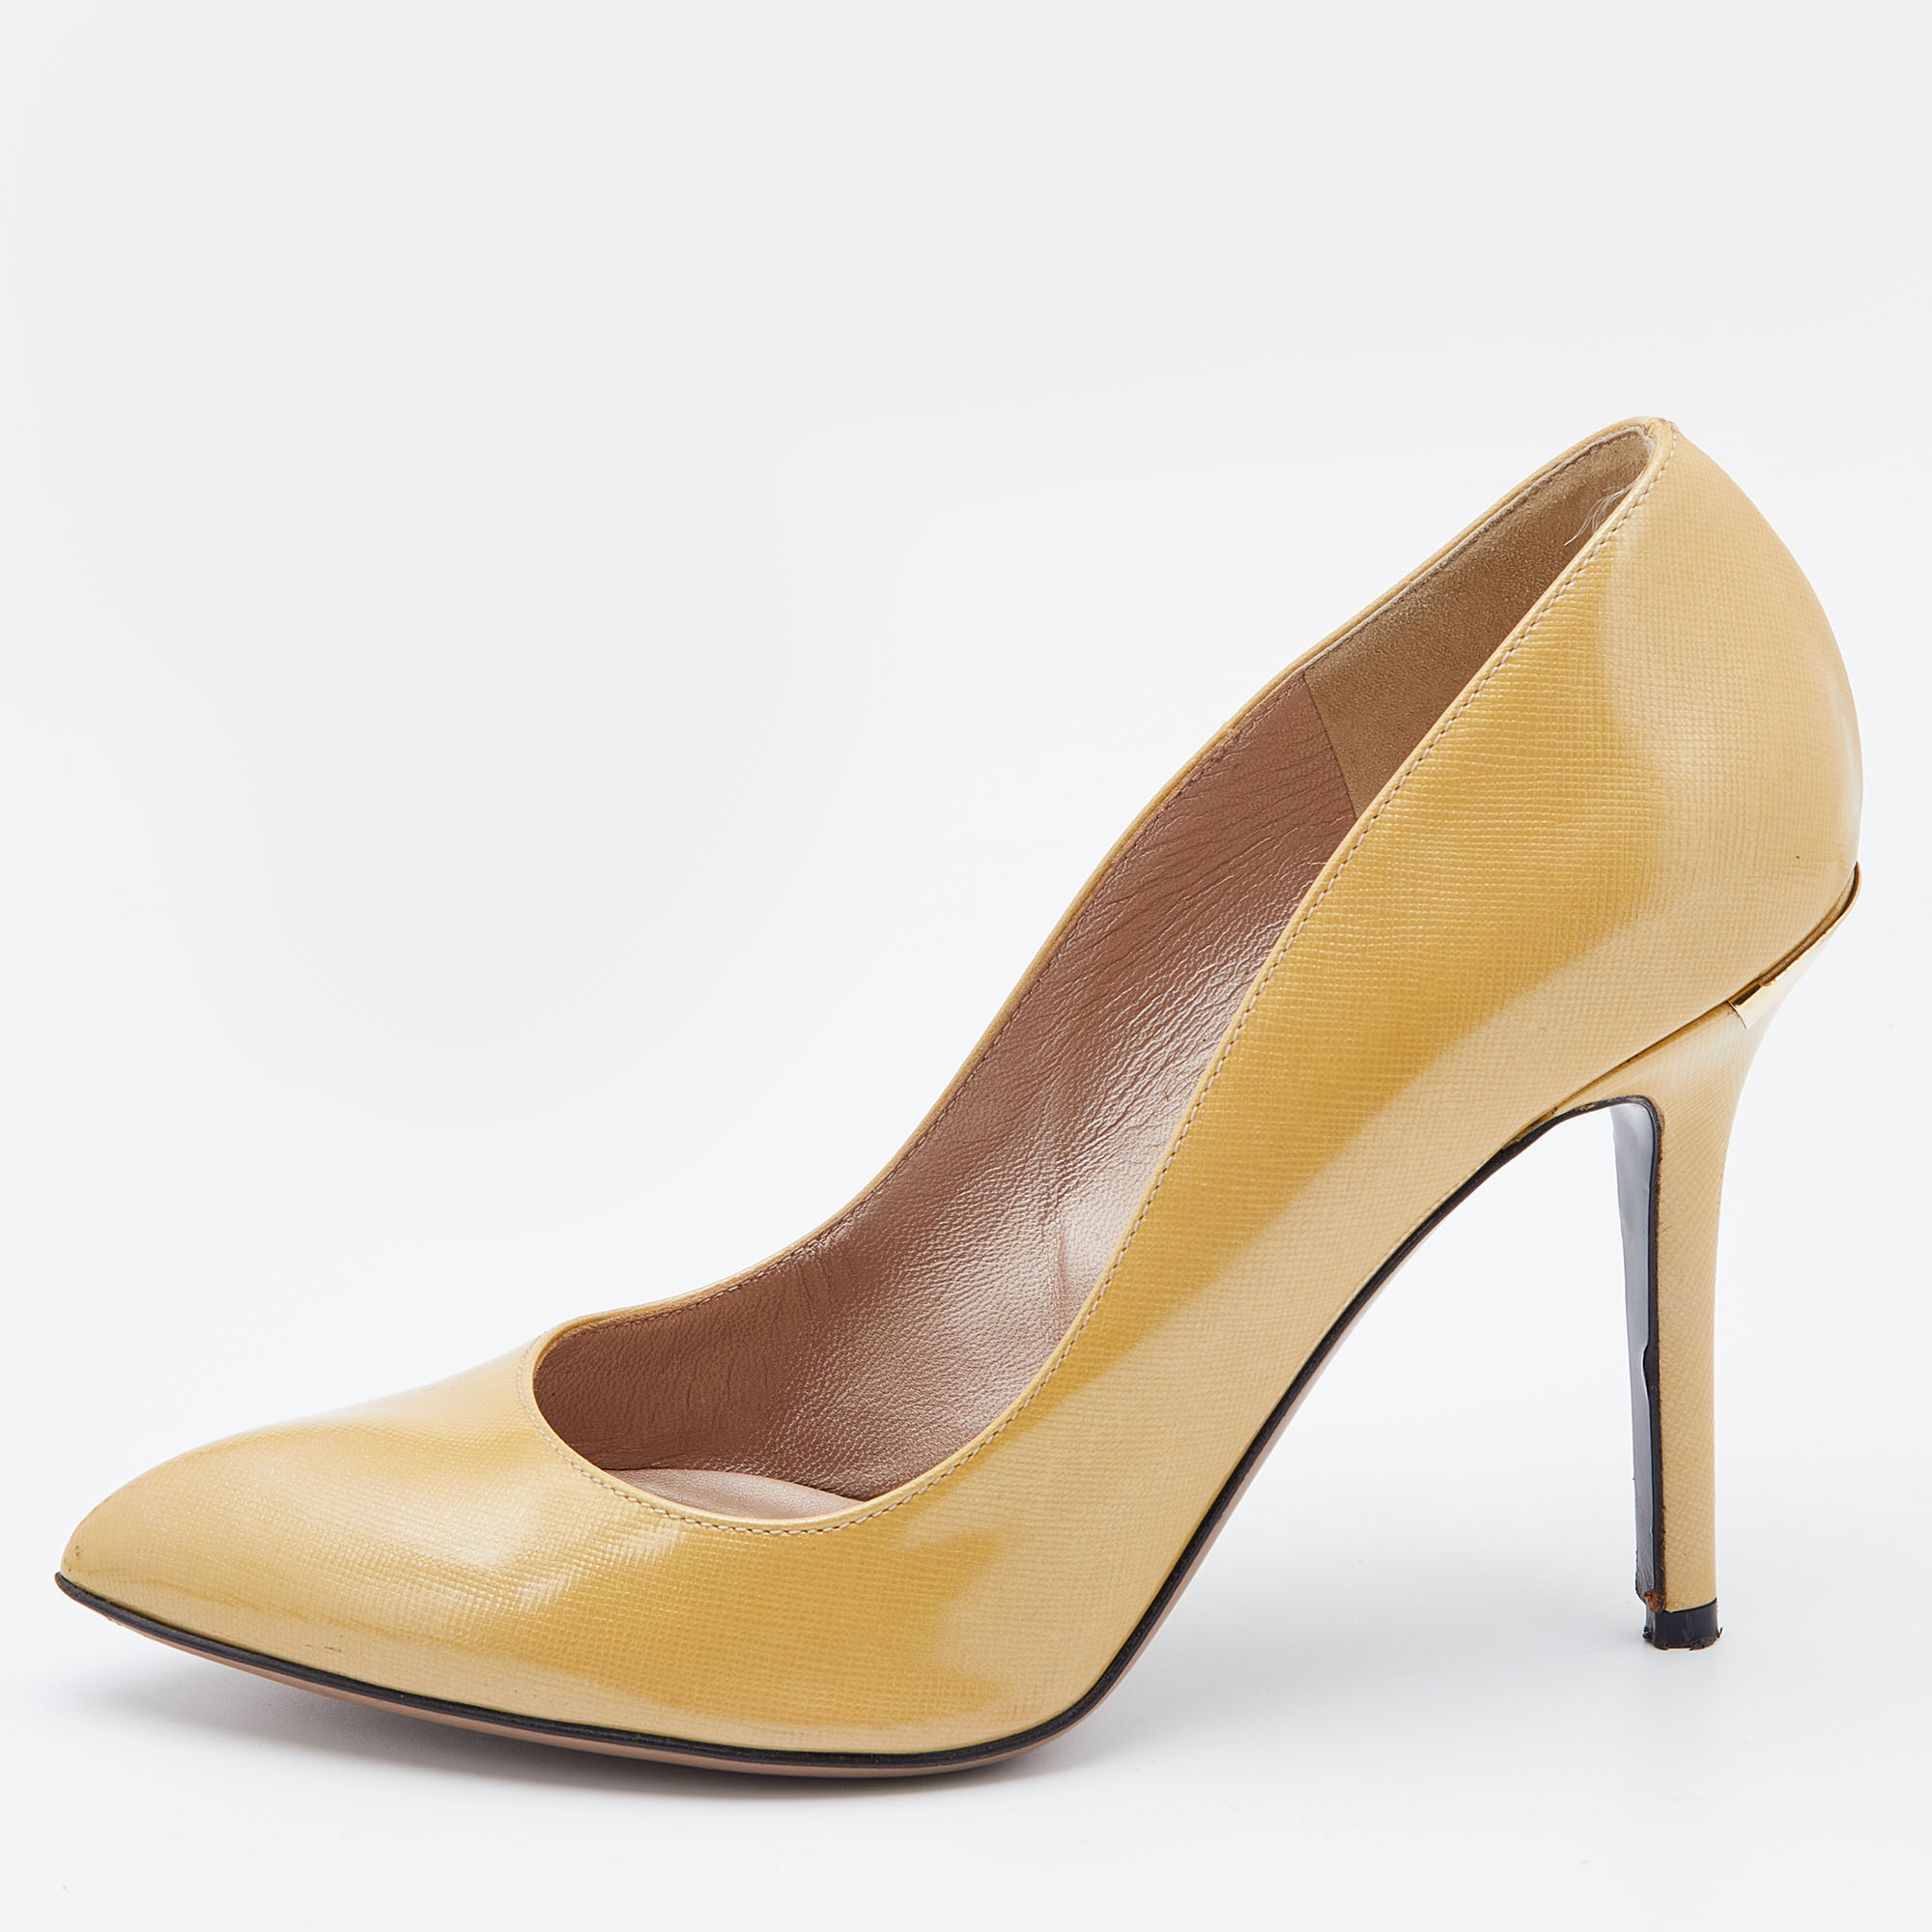 These curvaceous pumps will add immense style to your look. Crafted from luxurious material they feature well lined insoles that offer endless comfort.